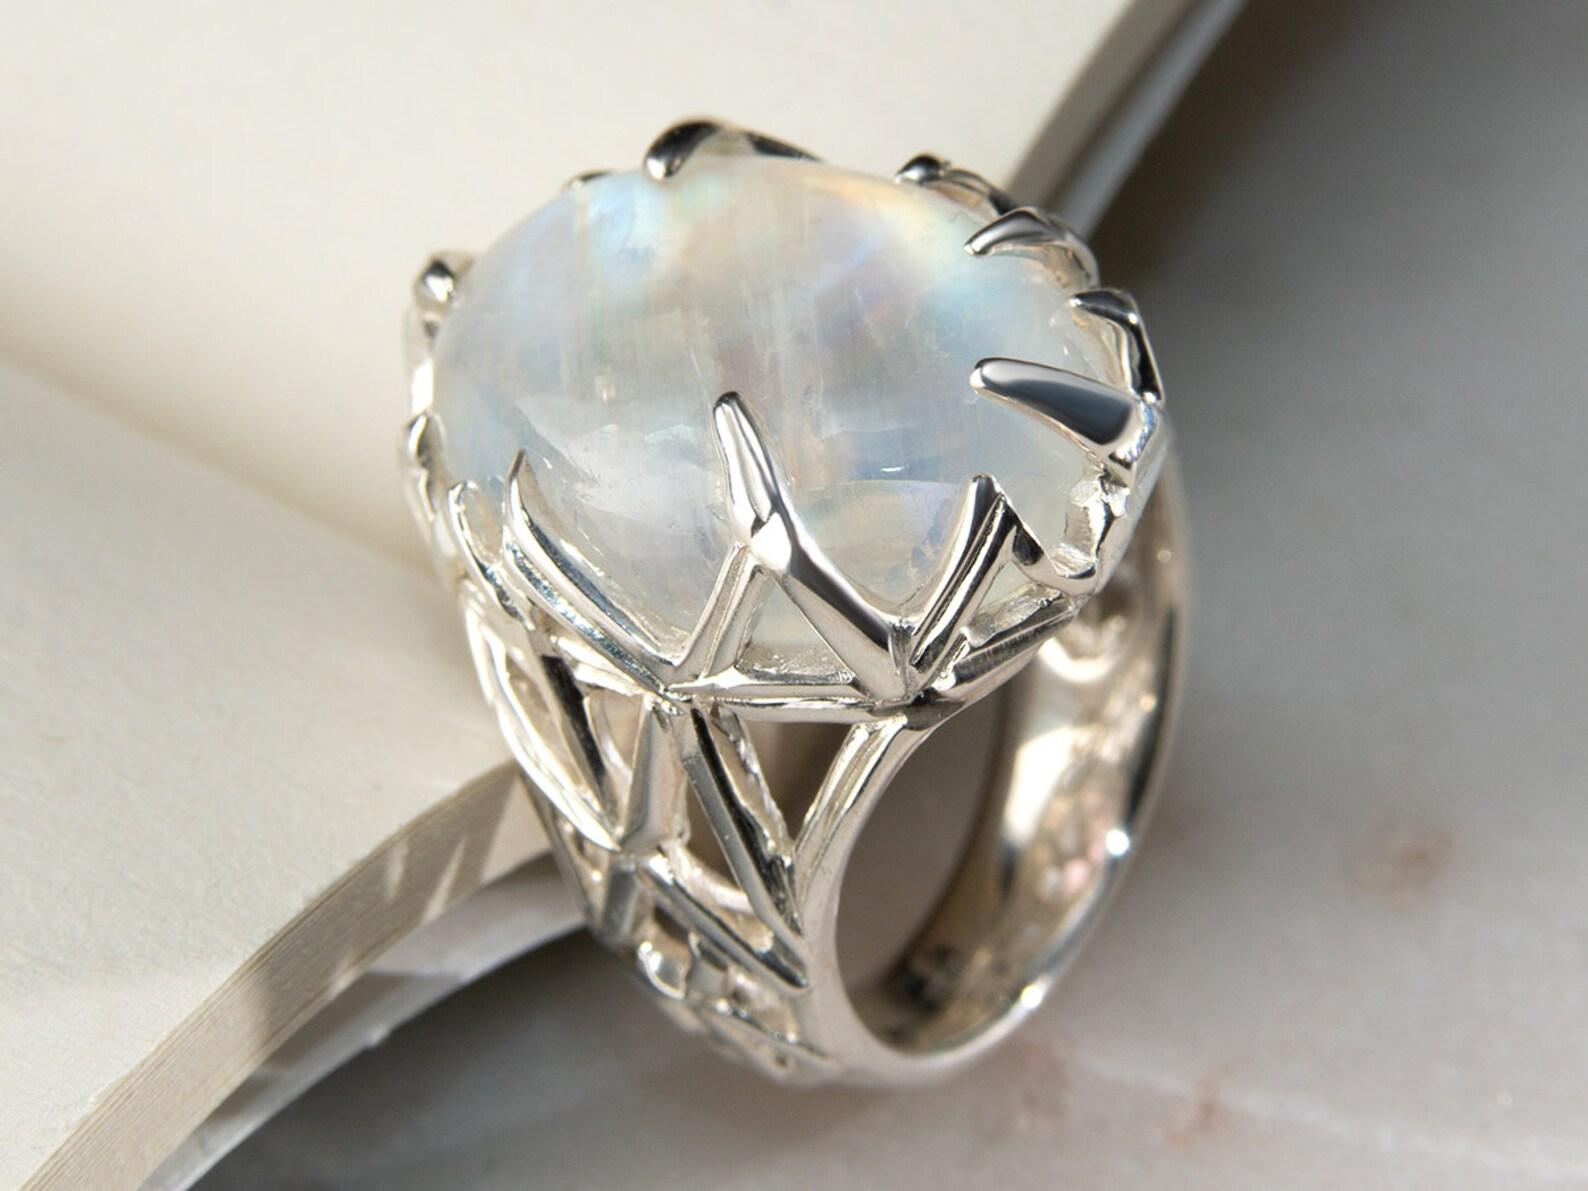 Women's or Men's Big Moonstone Adularia Silver Ring Cabochon Translucent Pearly White Clear Stone For Sale